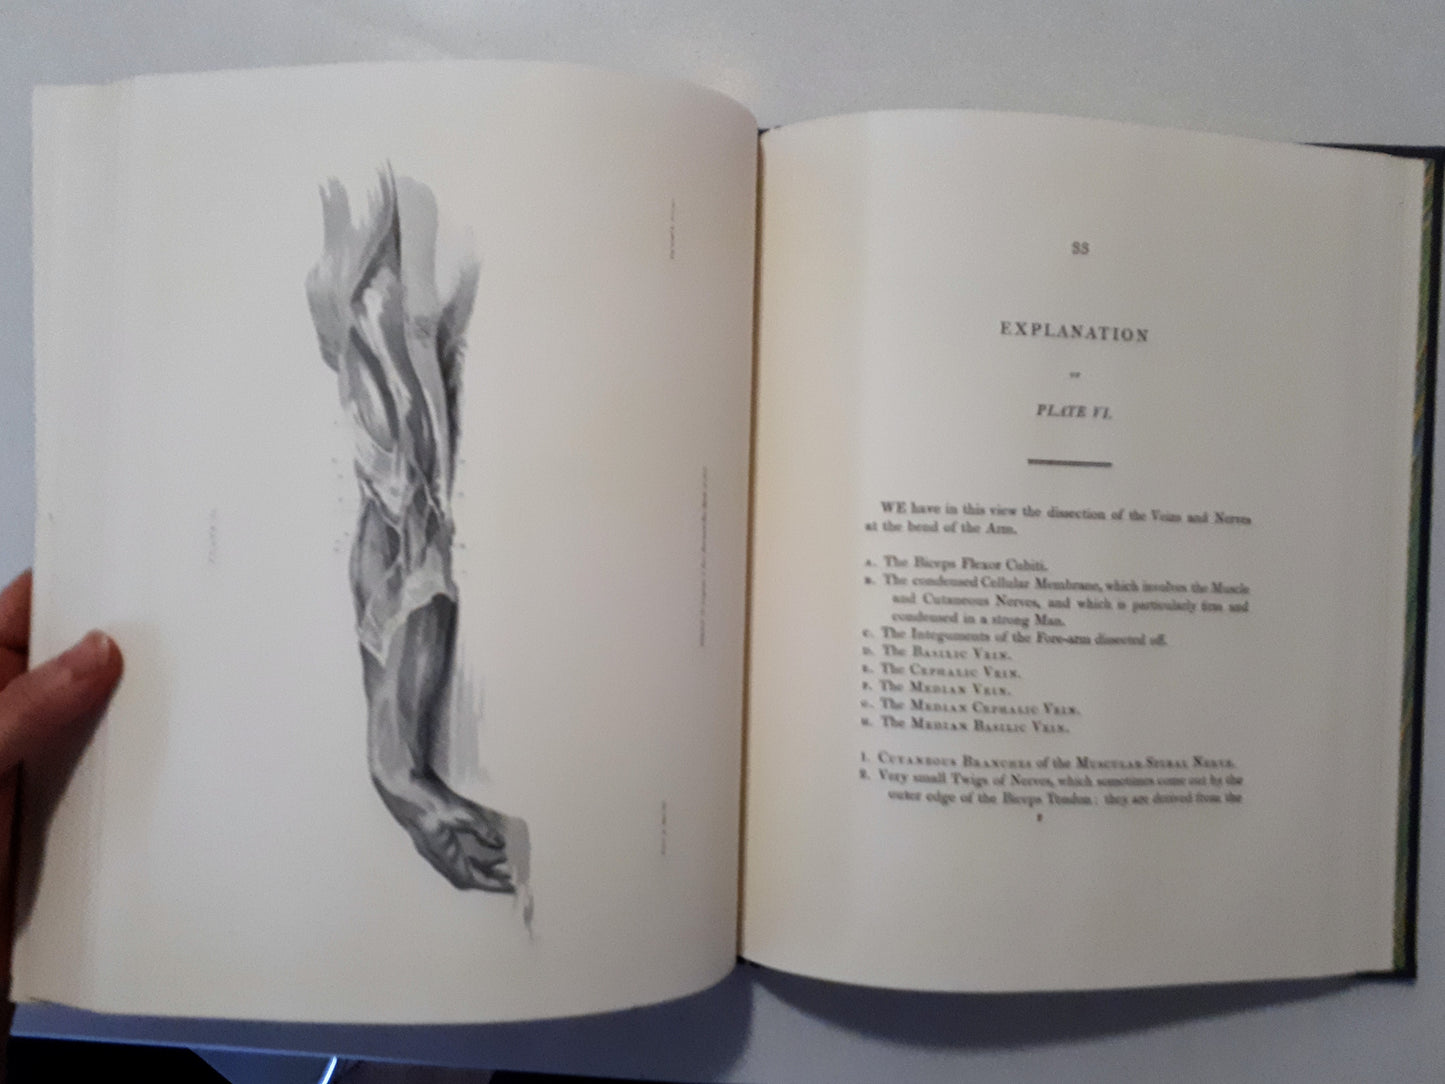 Engravings of the Brain and Nerves by Sir Charles Bell